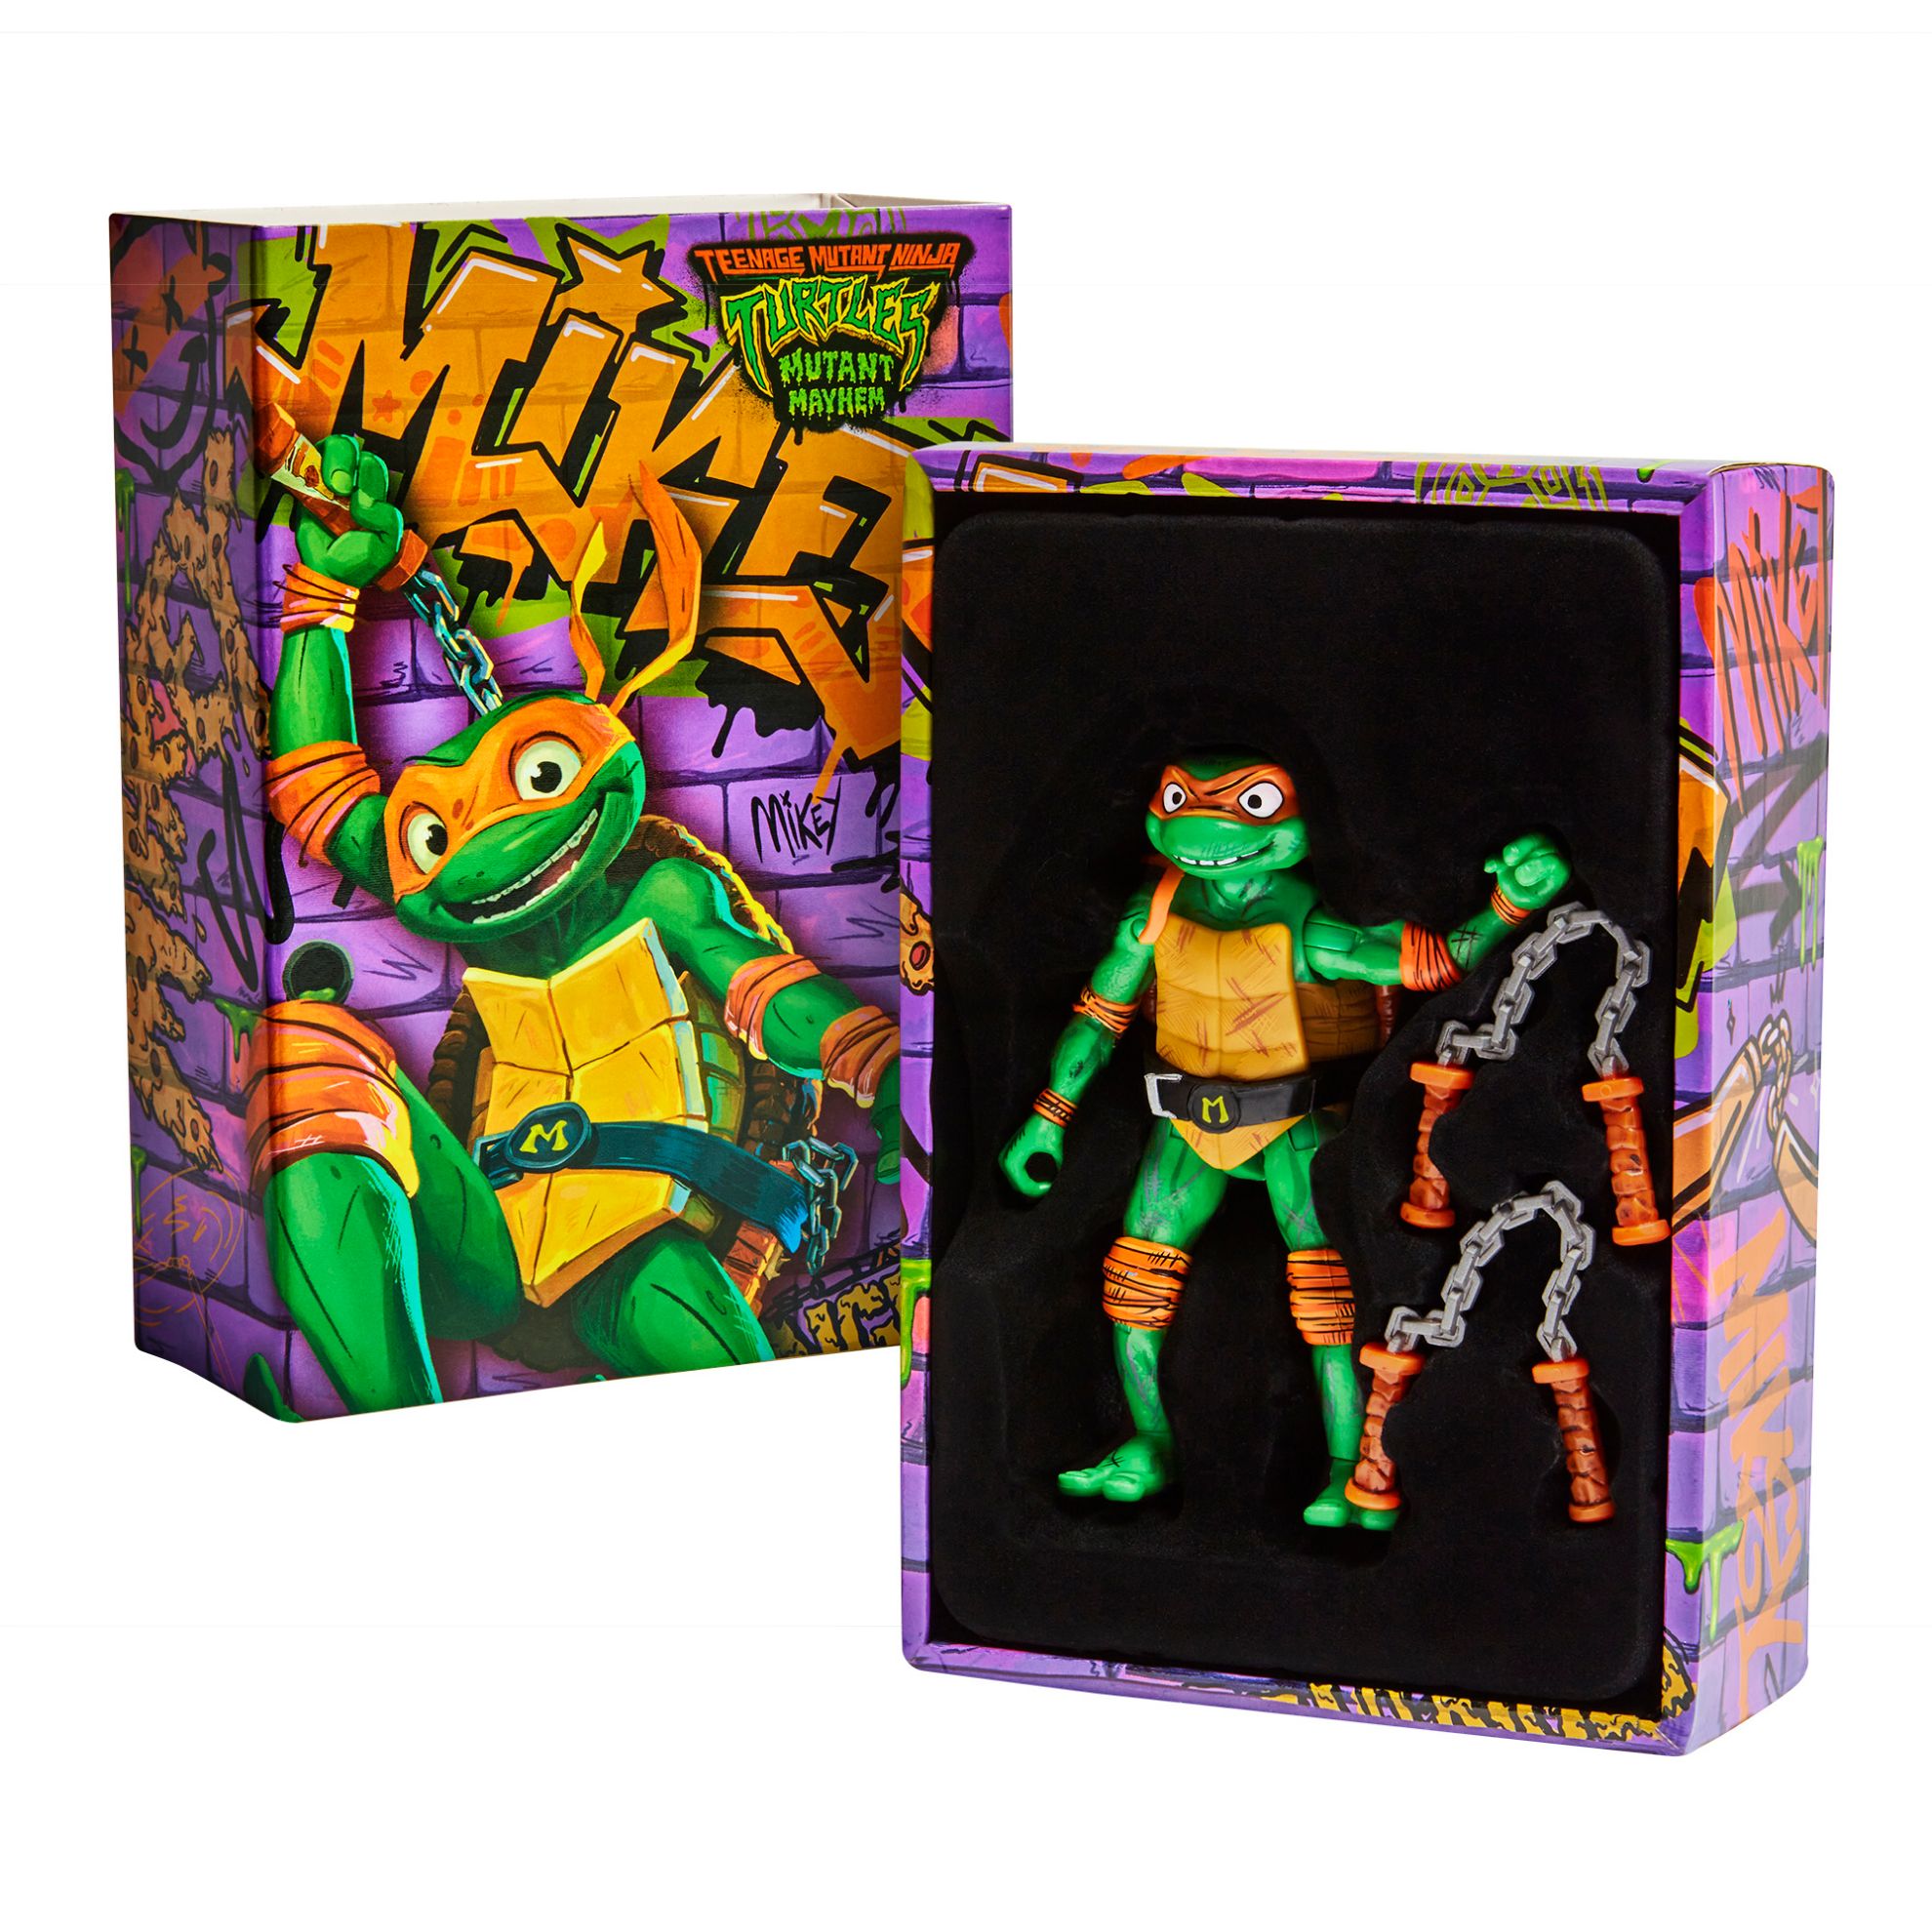 https://www.character-online.com/images/thumbs/0019604_tmnt-special-edition-mutant-mayhem-action-figure-michelangelo.jpeg